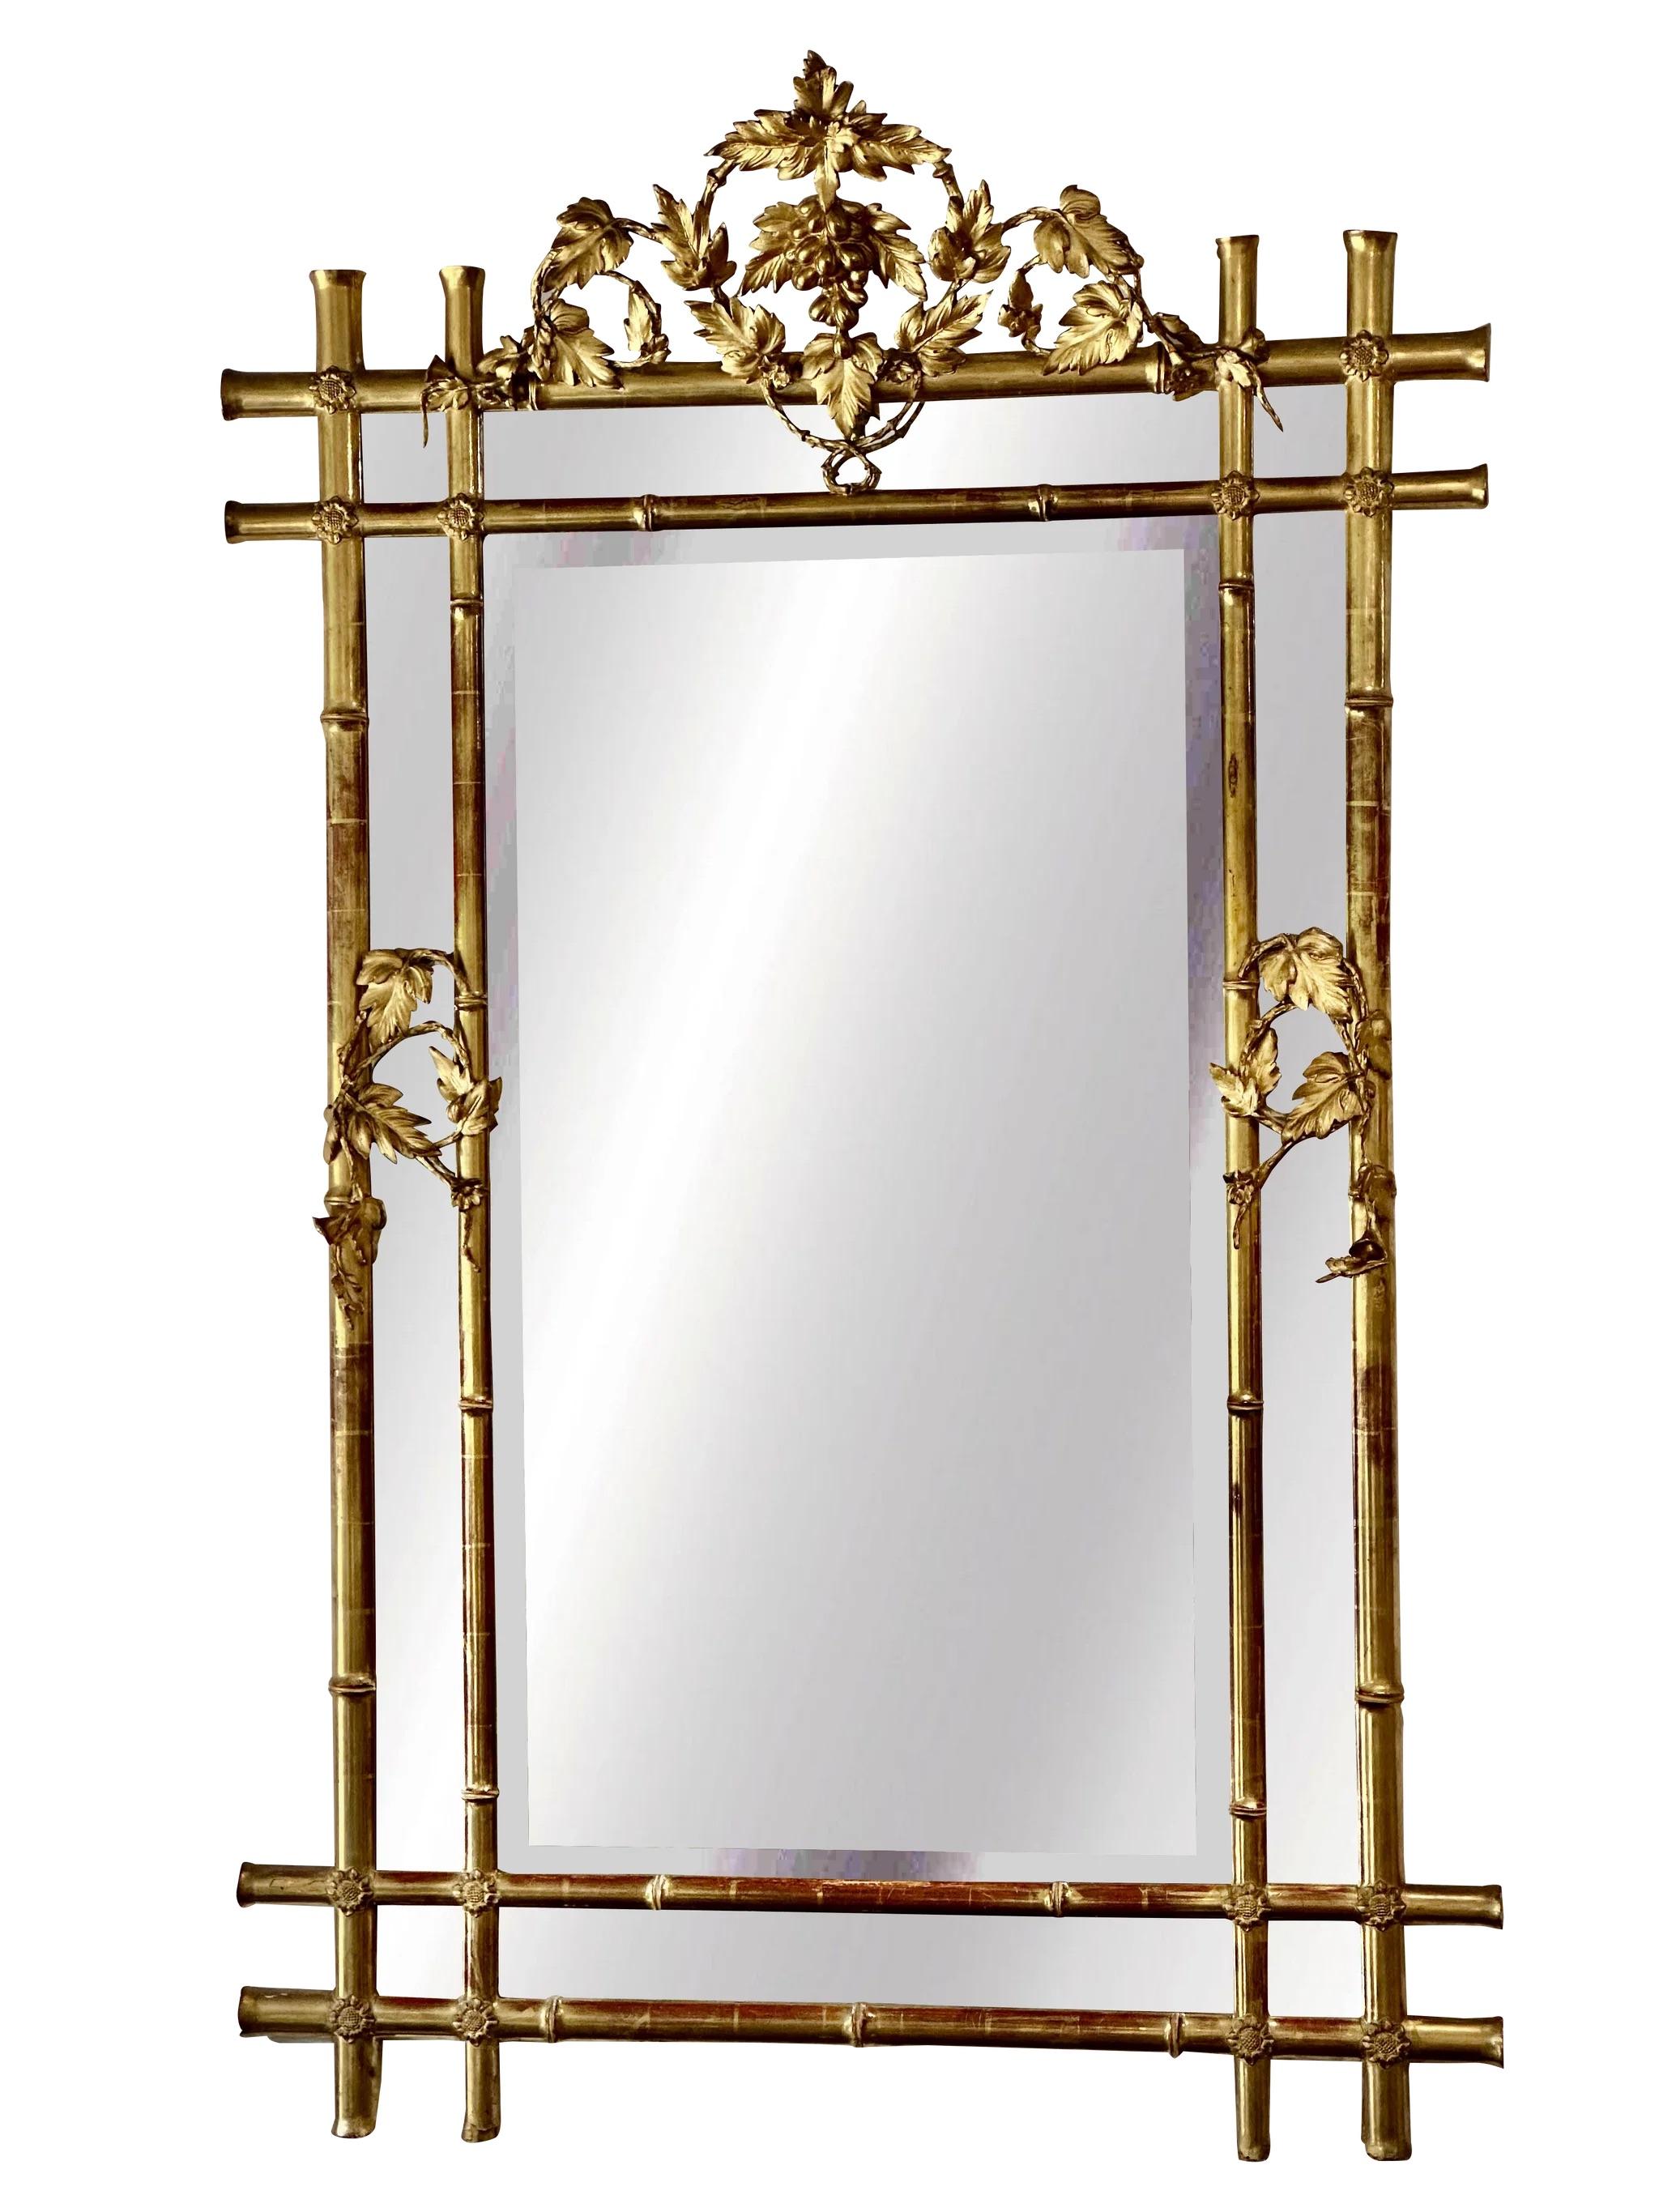 A period French Louis Philippe giltwood and gesso looking glass, the large form with a faux bamboo frame accented with grape and vine continuing to the grape cluster crest, overall 70